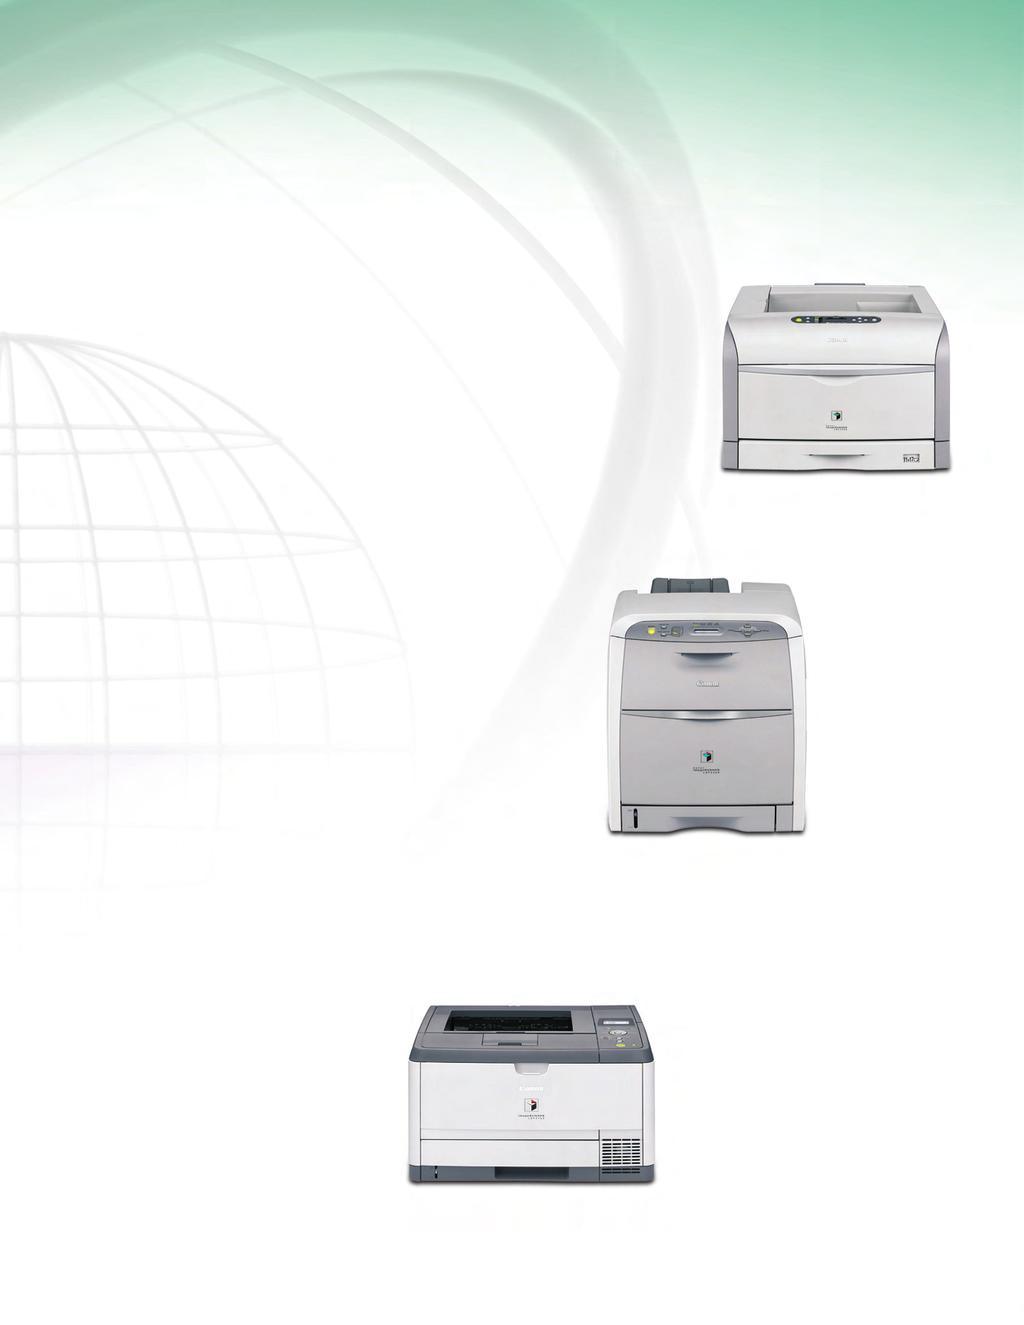 MEET THE NEW STANDARDS FOR DESKTOP PRODUCTIVITY Three unique models that meet the demands of any corporate workgroup COLOR imagerunner LBP5960 This swift performer is capable of output at up to 30